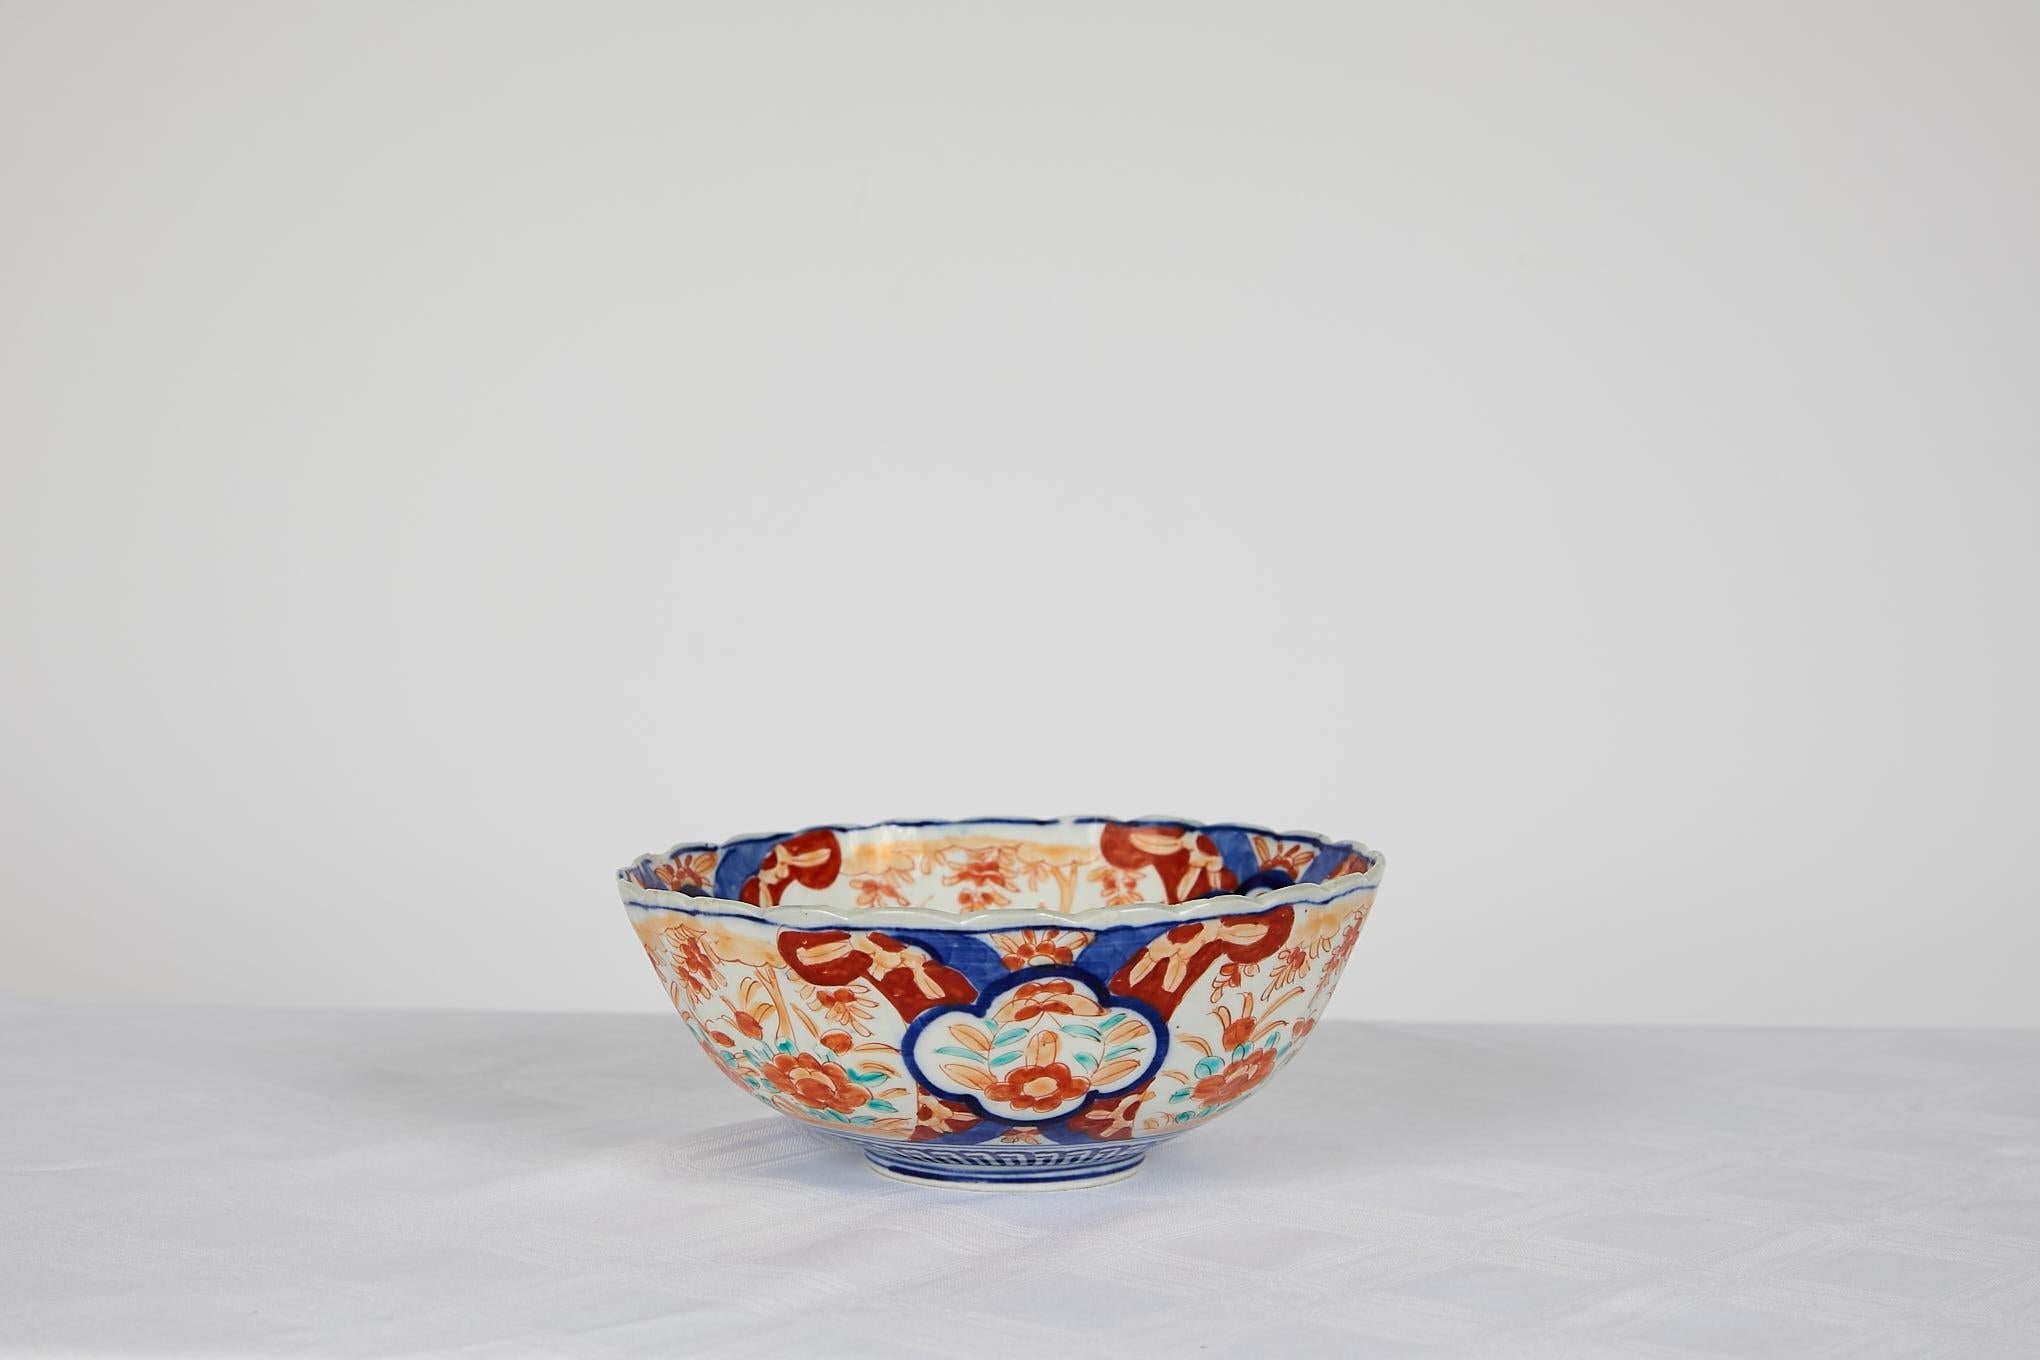 Early 20th century Japanese Imari scalloped bowl with a center medallion surrounded by alternating floral decorations hand painted in hues of cobalt blue, burnt orange, and emerald green.